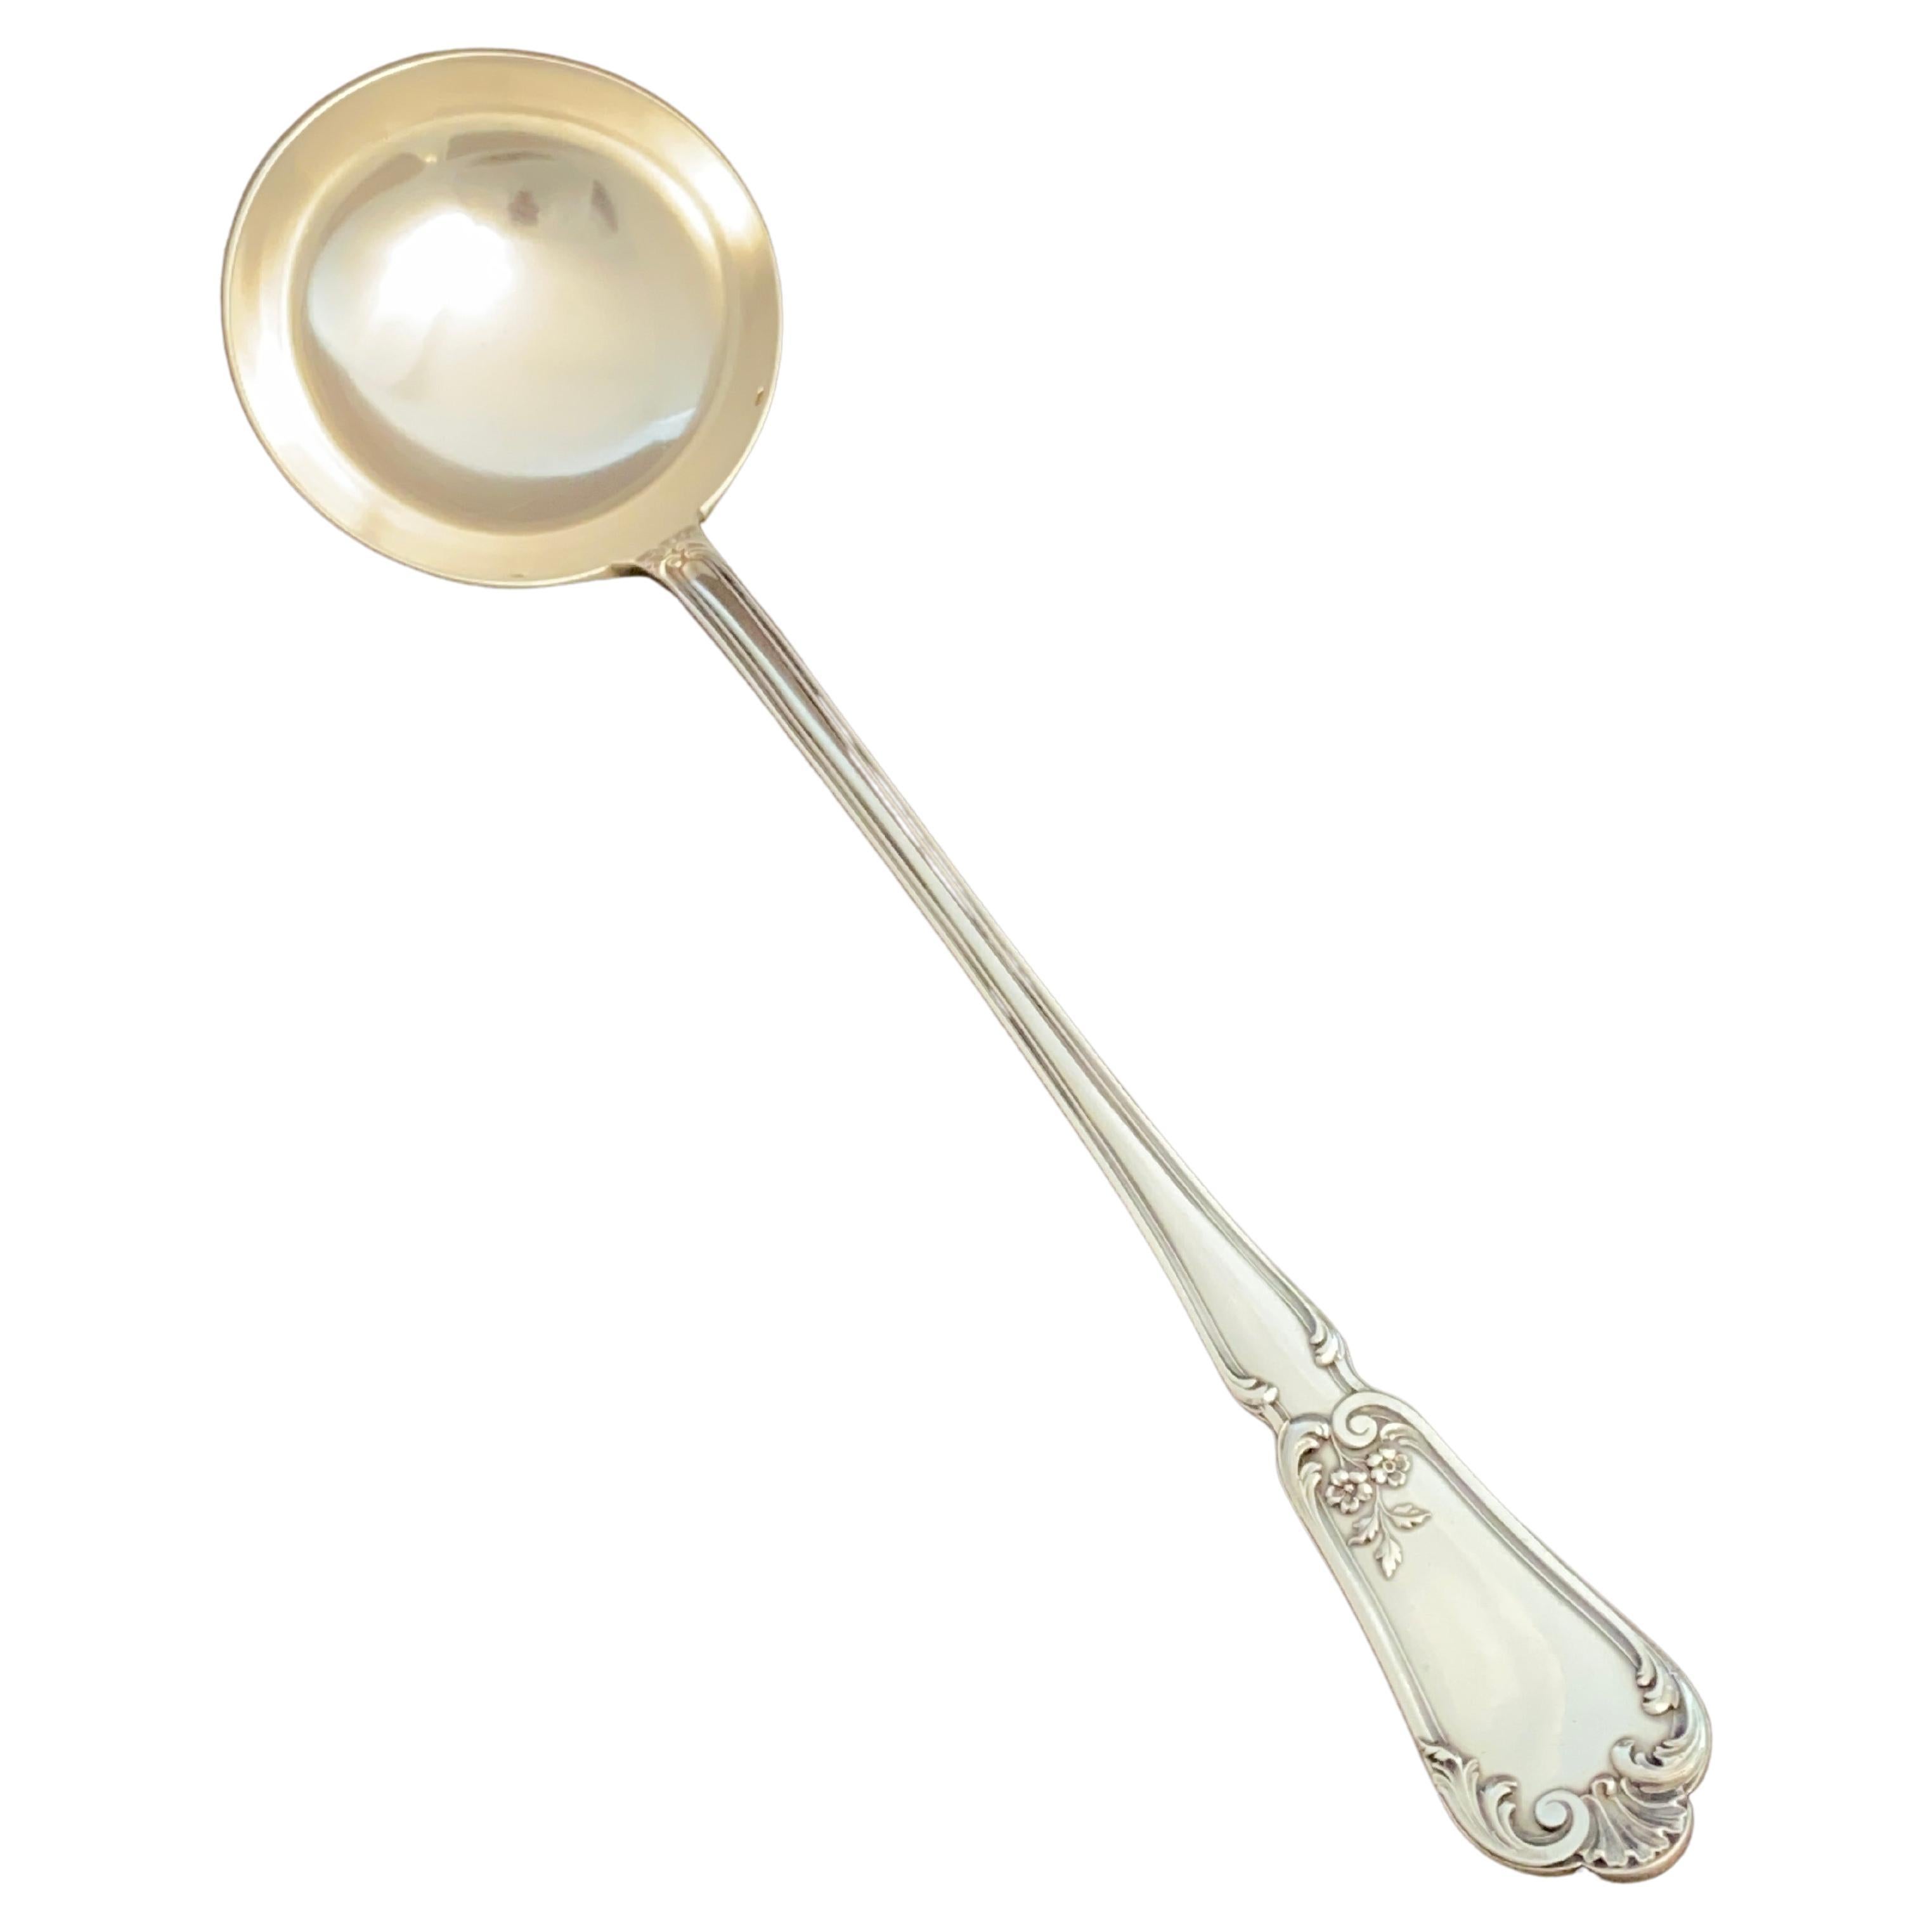 19th Century French Sterling Silver Ladle